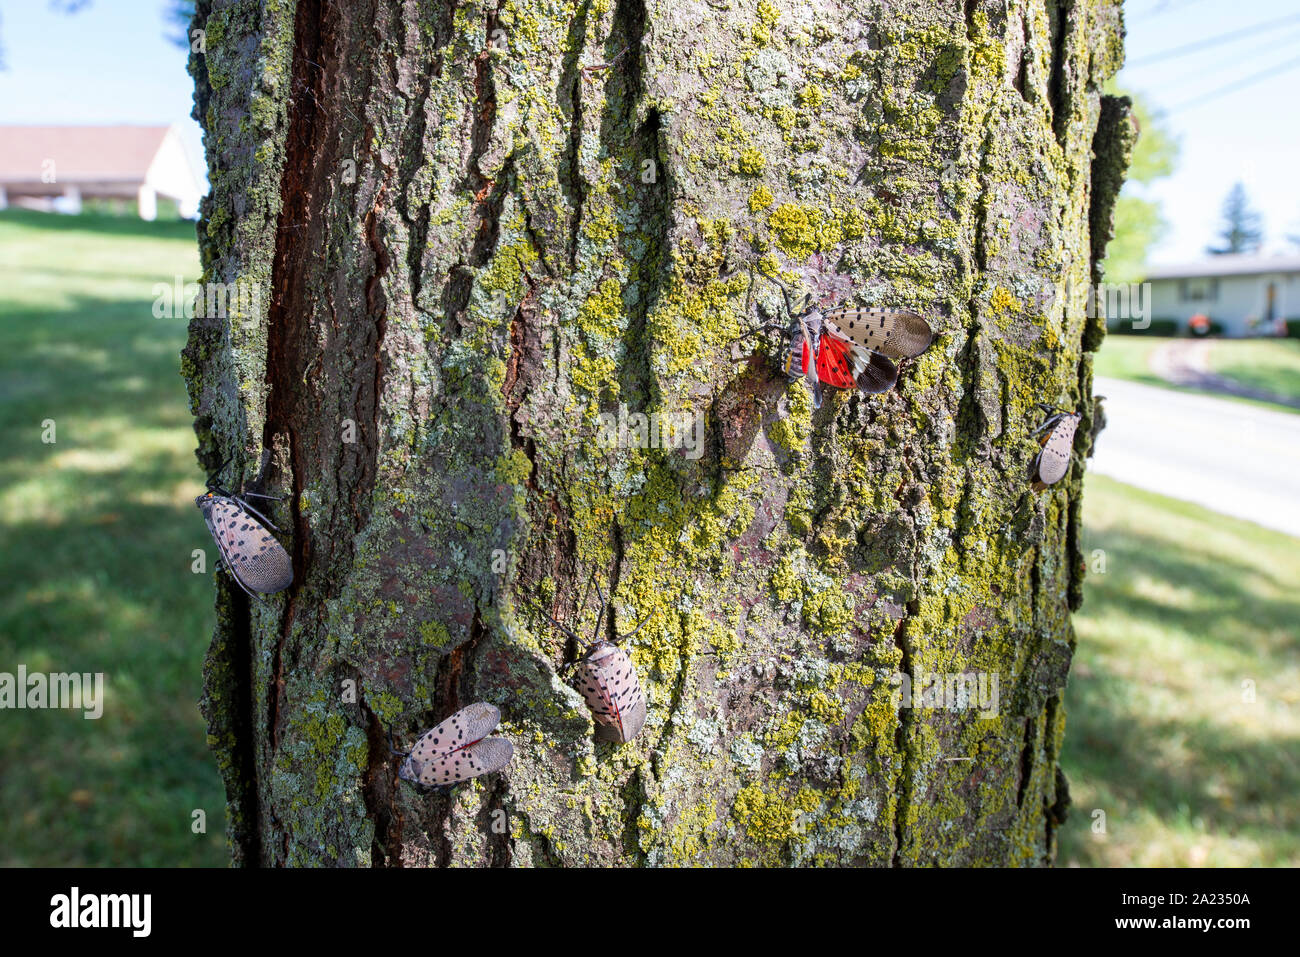 GROUP OF SPOTTED LANTERNFLY (LYCORMA DELICATULA) ADULTS (ONE SHOWING RED UNDER WINGS) ON LOCUST TREE, PENNSYLVANIA Stock Photo